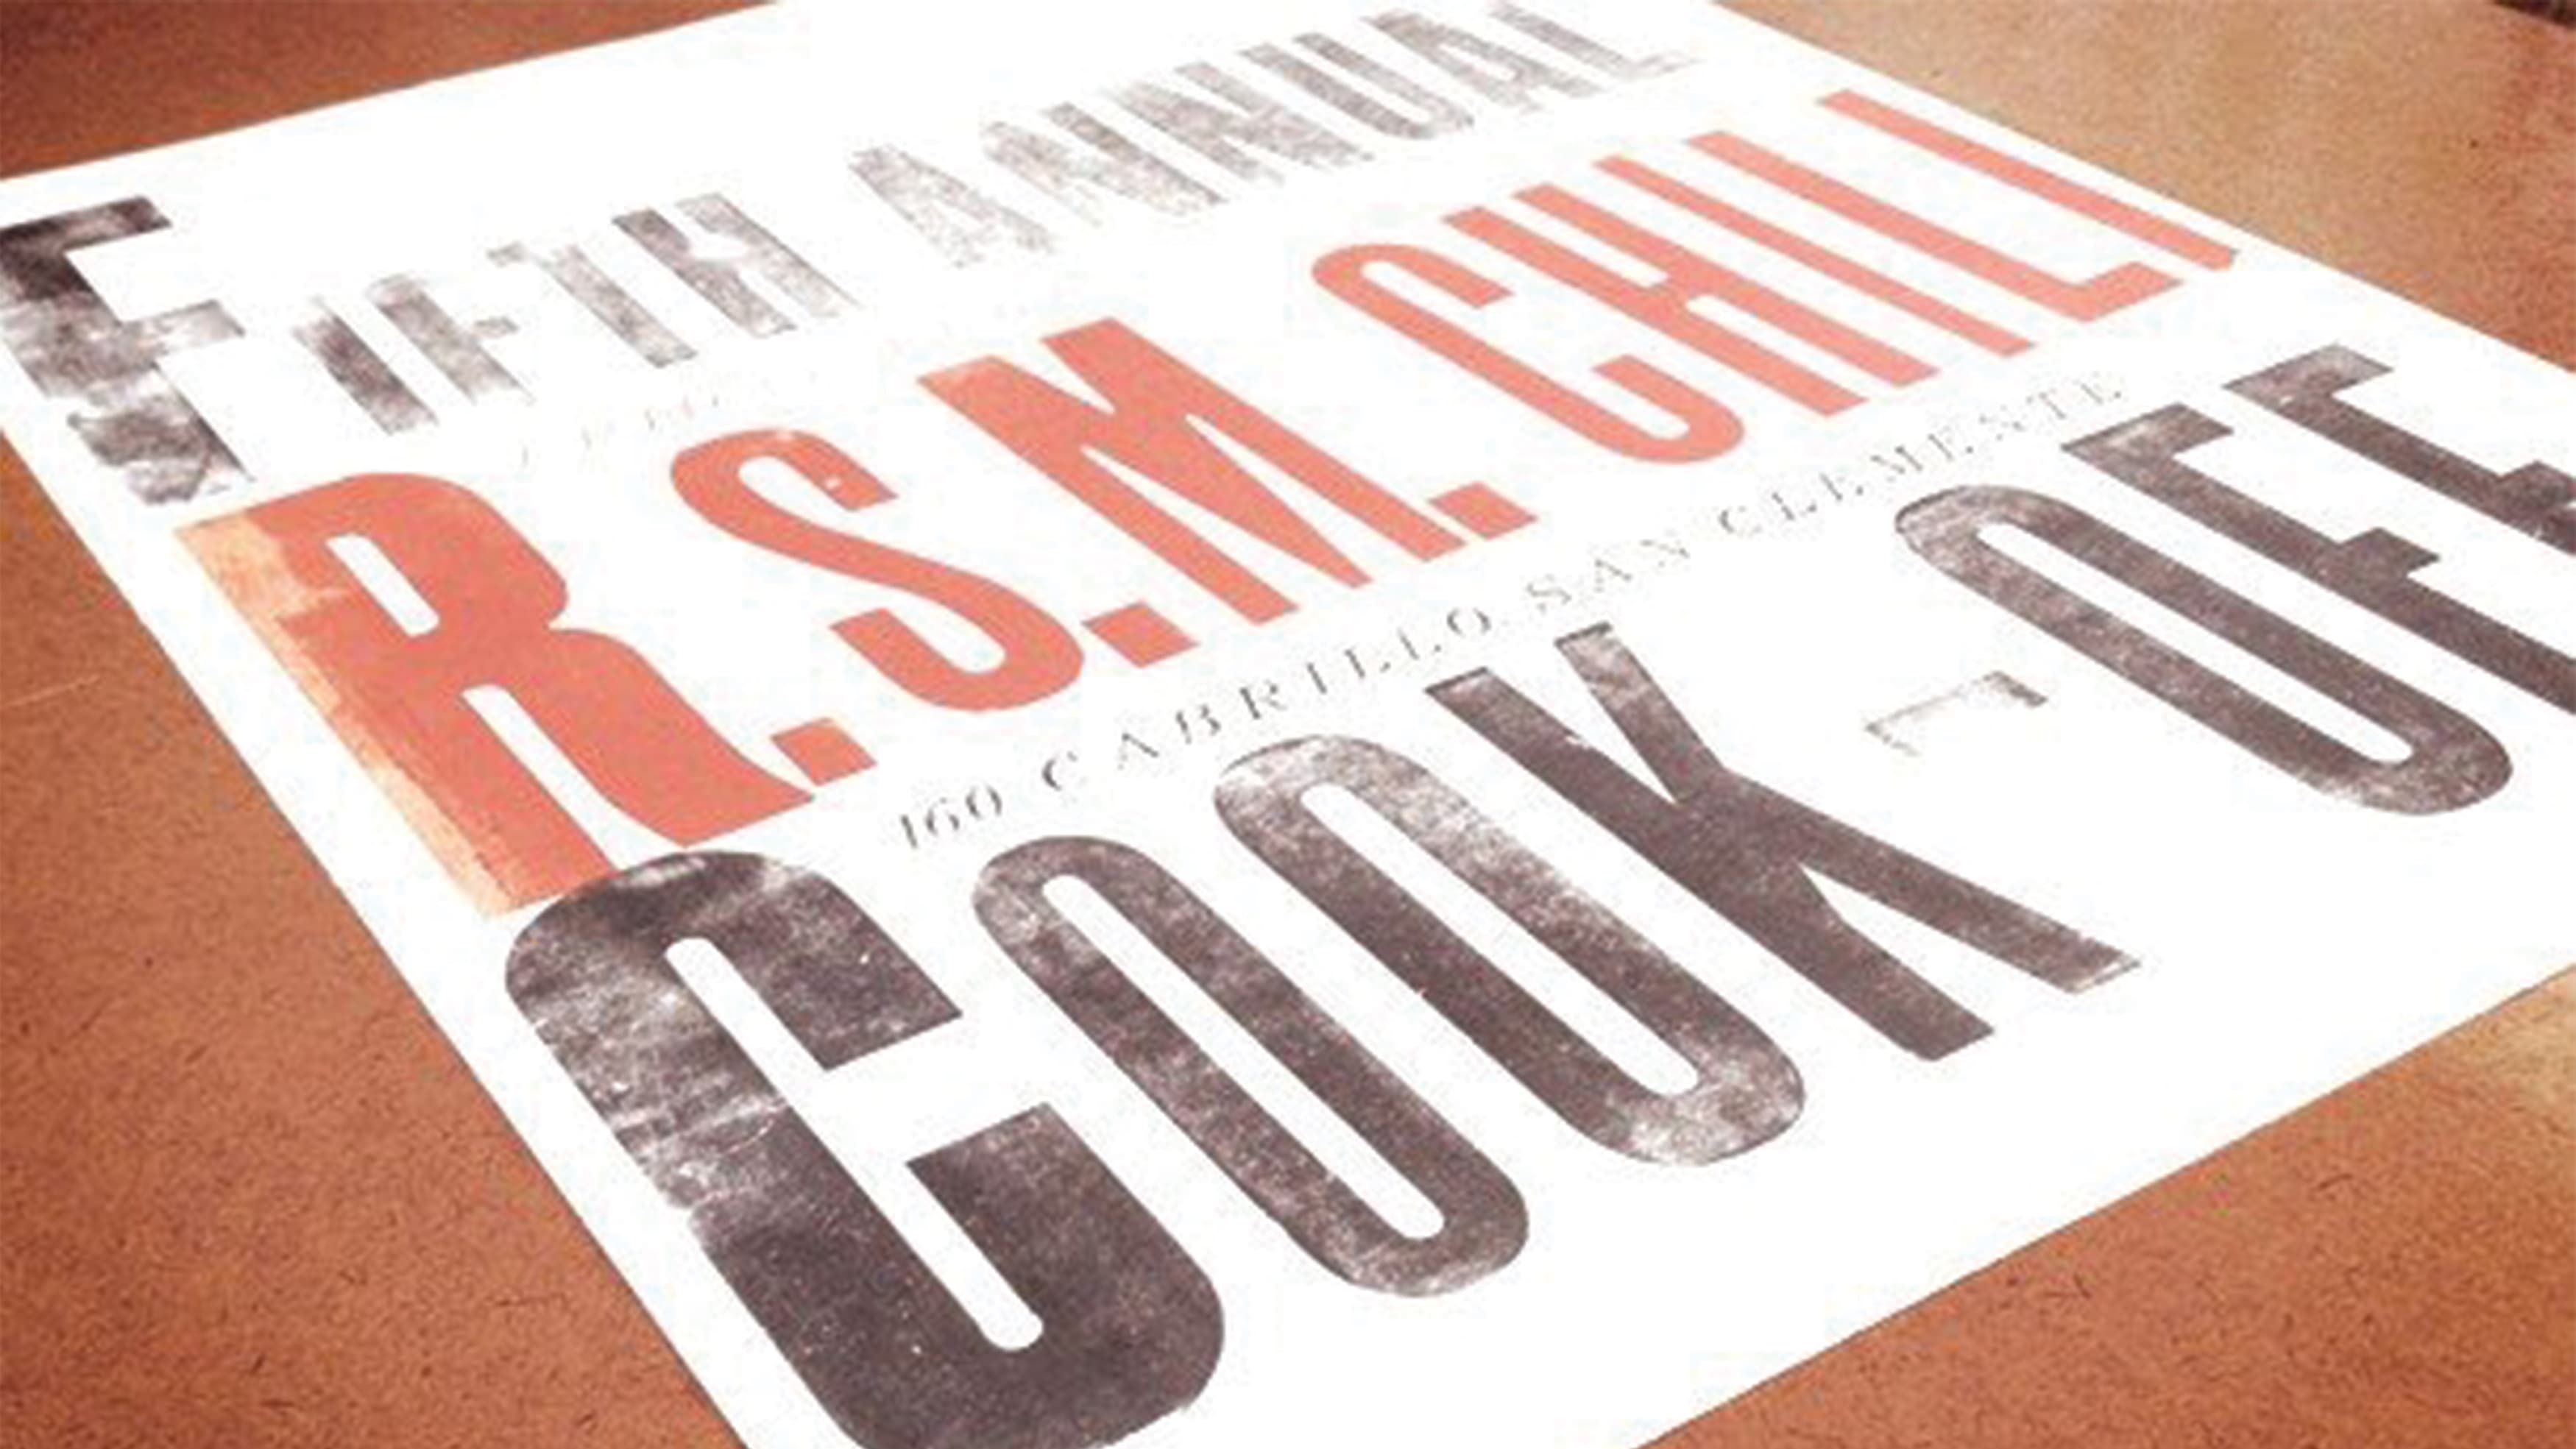 RSM Design's poster for the 5th Annual Chili Cook Off